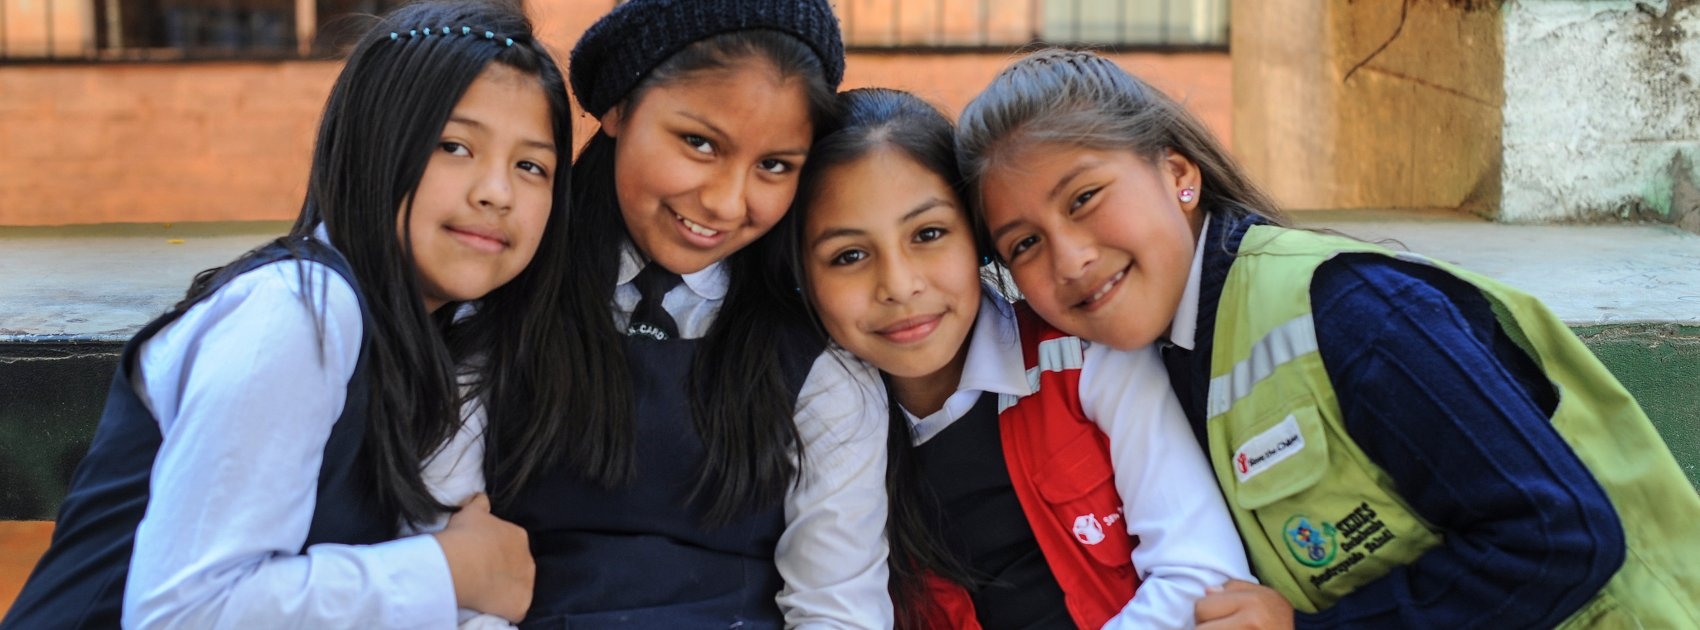 Girls pose for a photograph at a school supported by Save the Children sponsorship programs. Save the Children is working hard in Bolivia to help kids stay healthy and stay in school through sponsorship programs at local elementary schools and early education centers. Photo Credit: Susan Warner/Save the Children 2015.